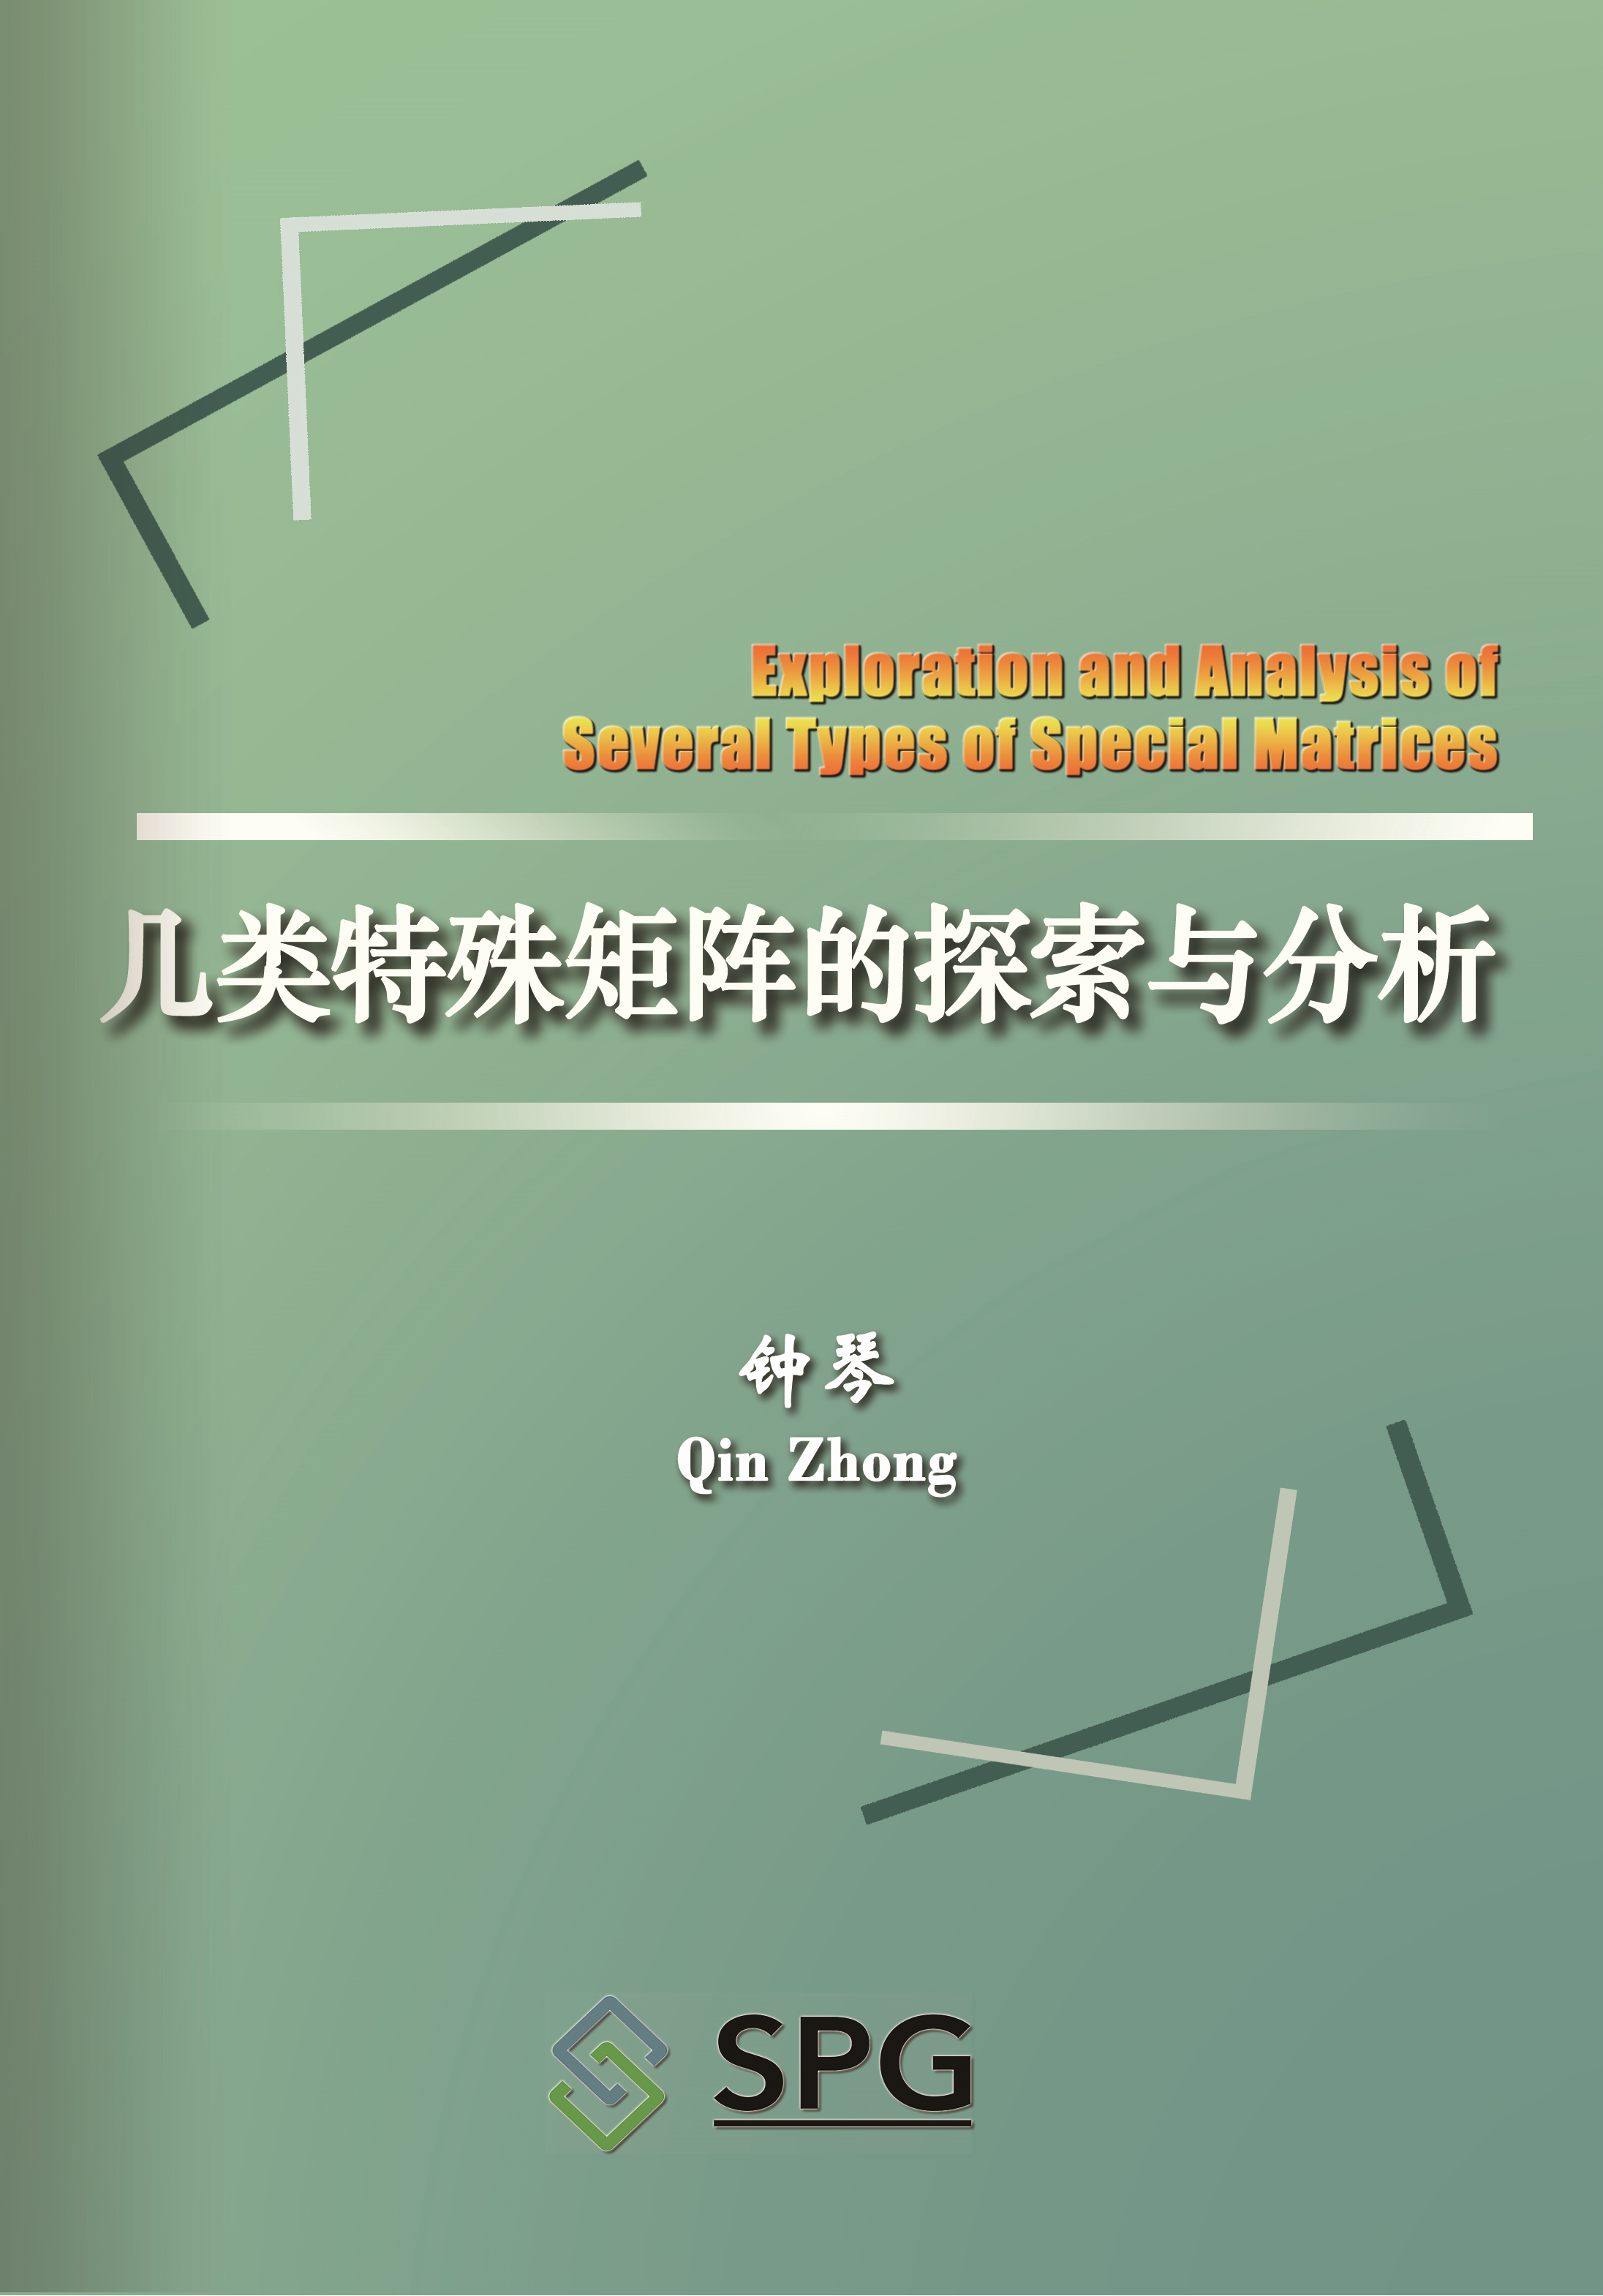 Exploration and Analysis of Several Types of Special Matrices | Scholar Publishing Group